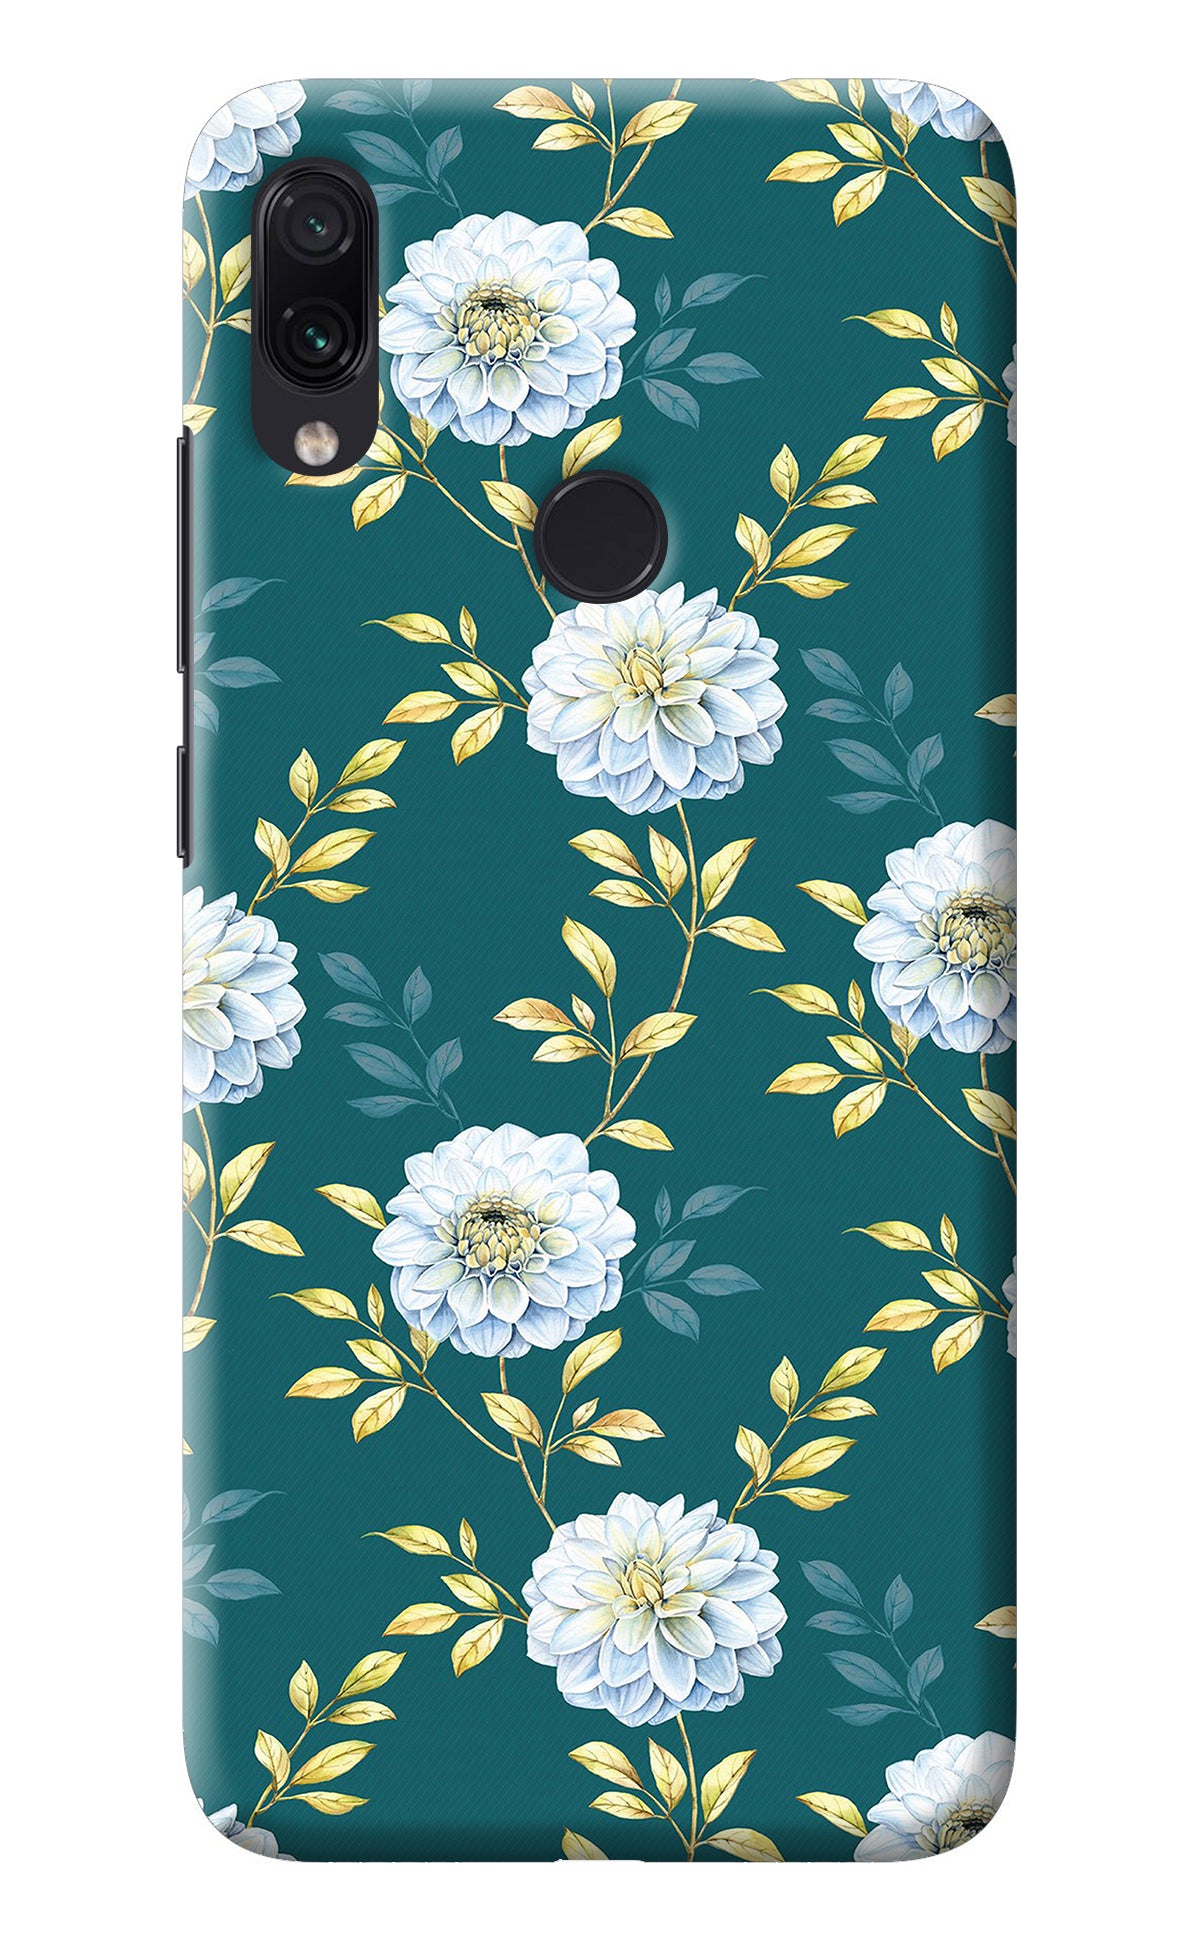 Flowers Redmi Note 7 Pro Back Cover